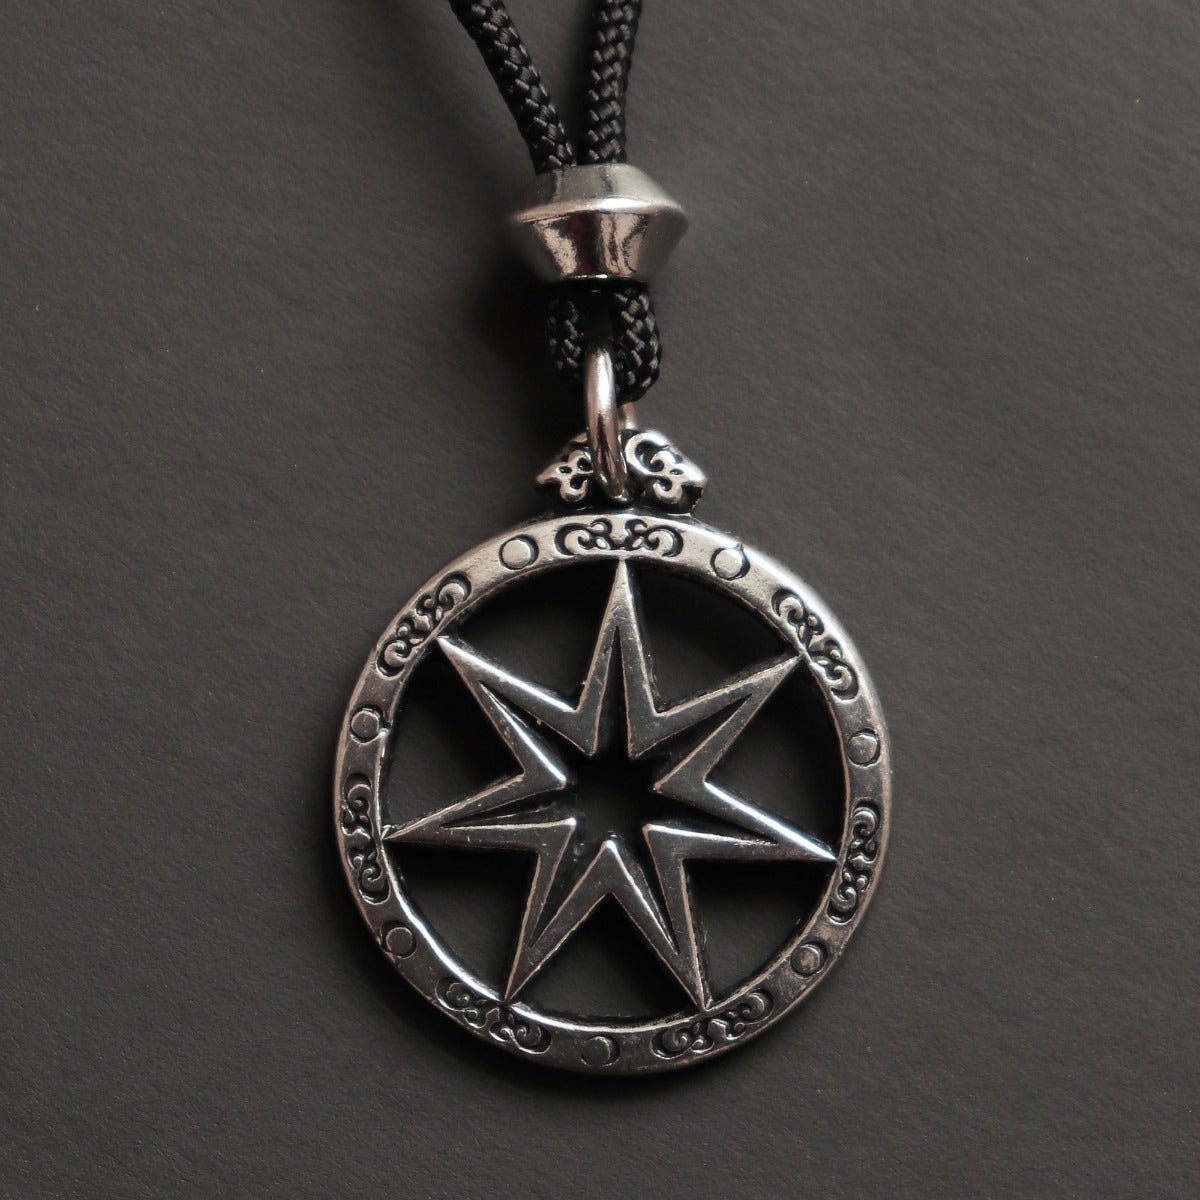 The Faery Star - Seven Point Star Pendant - 13 Moons